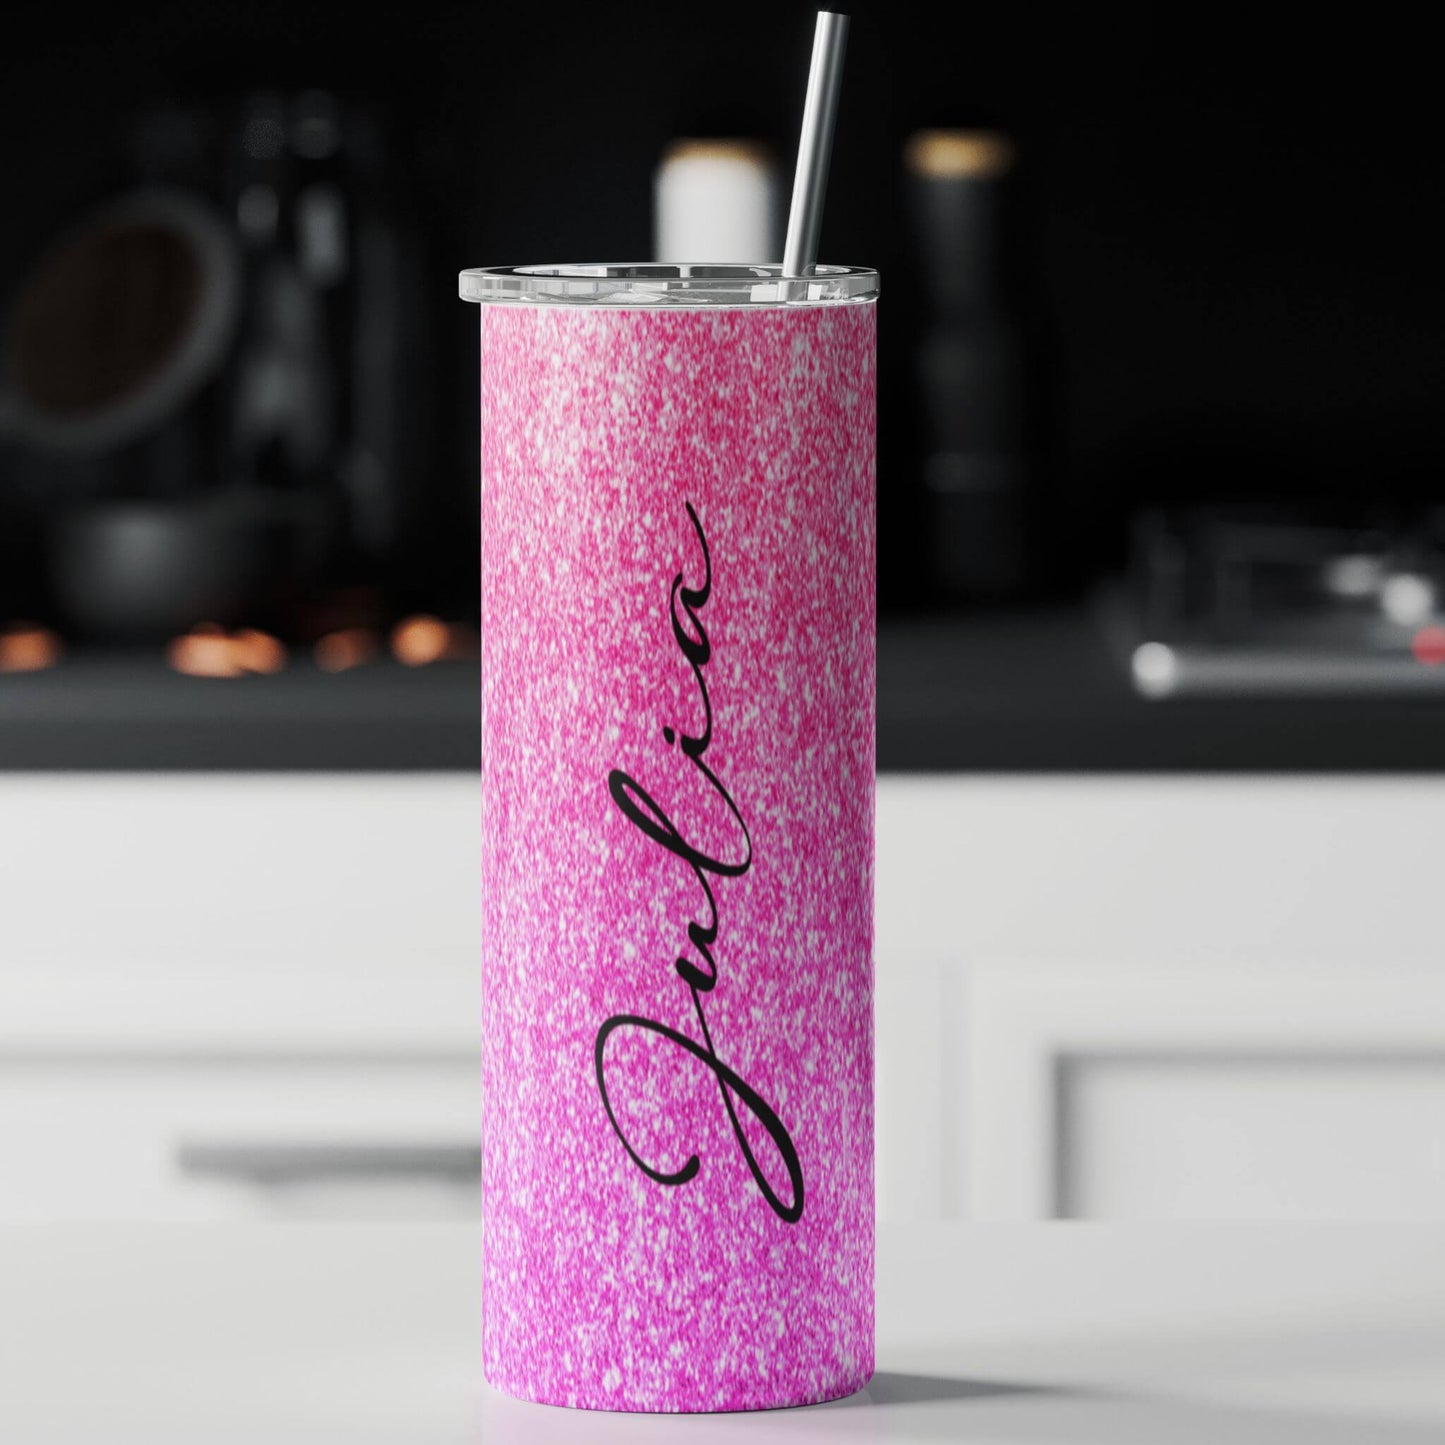 Sublimation Tumbler with Straw 22oz - Blush Pink